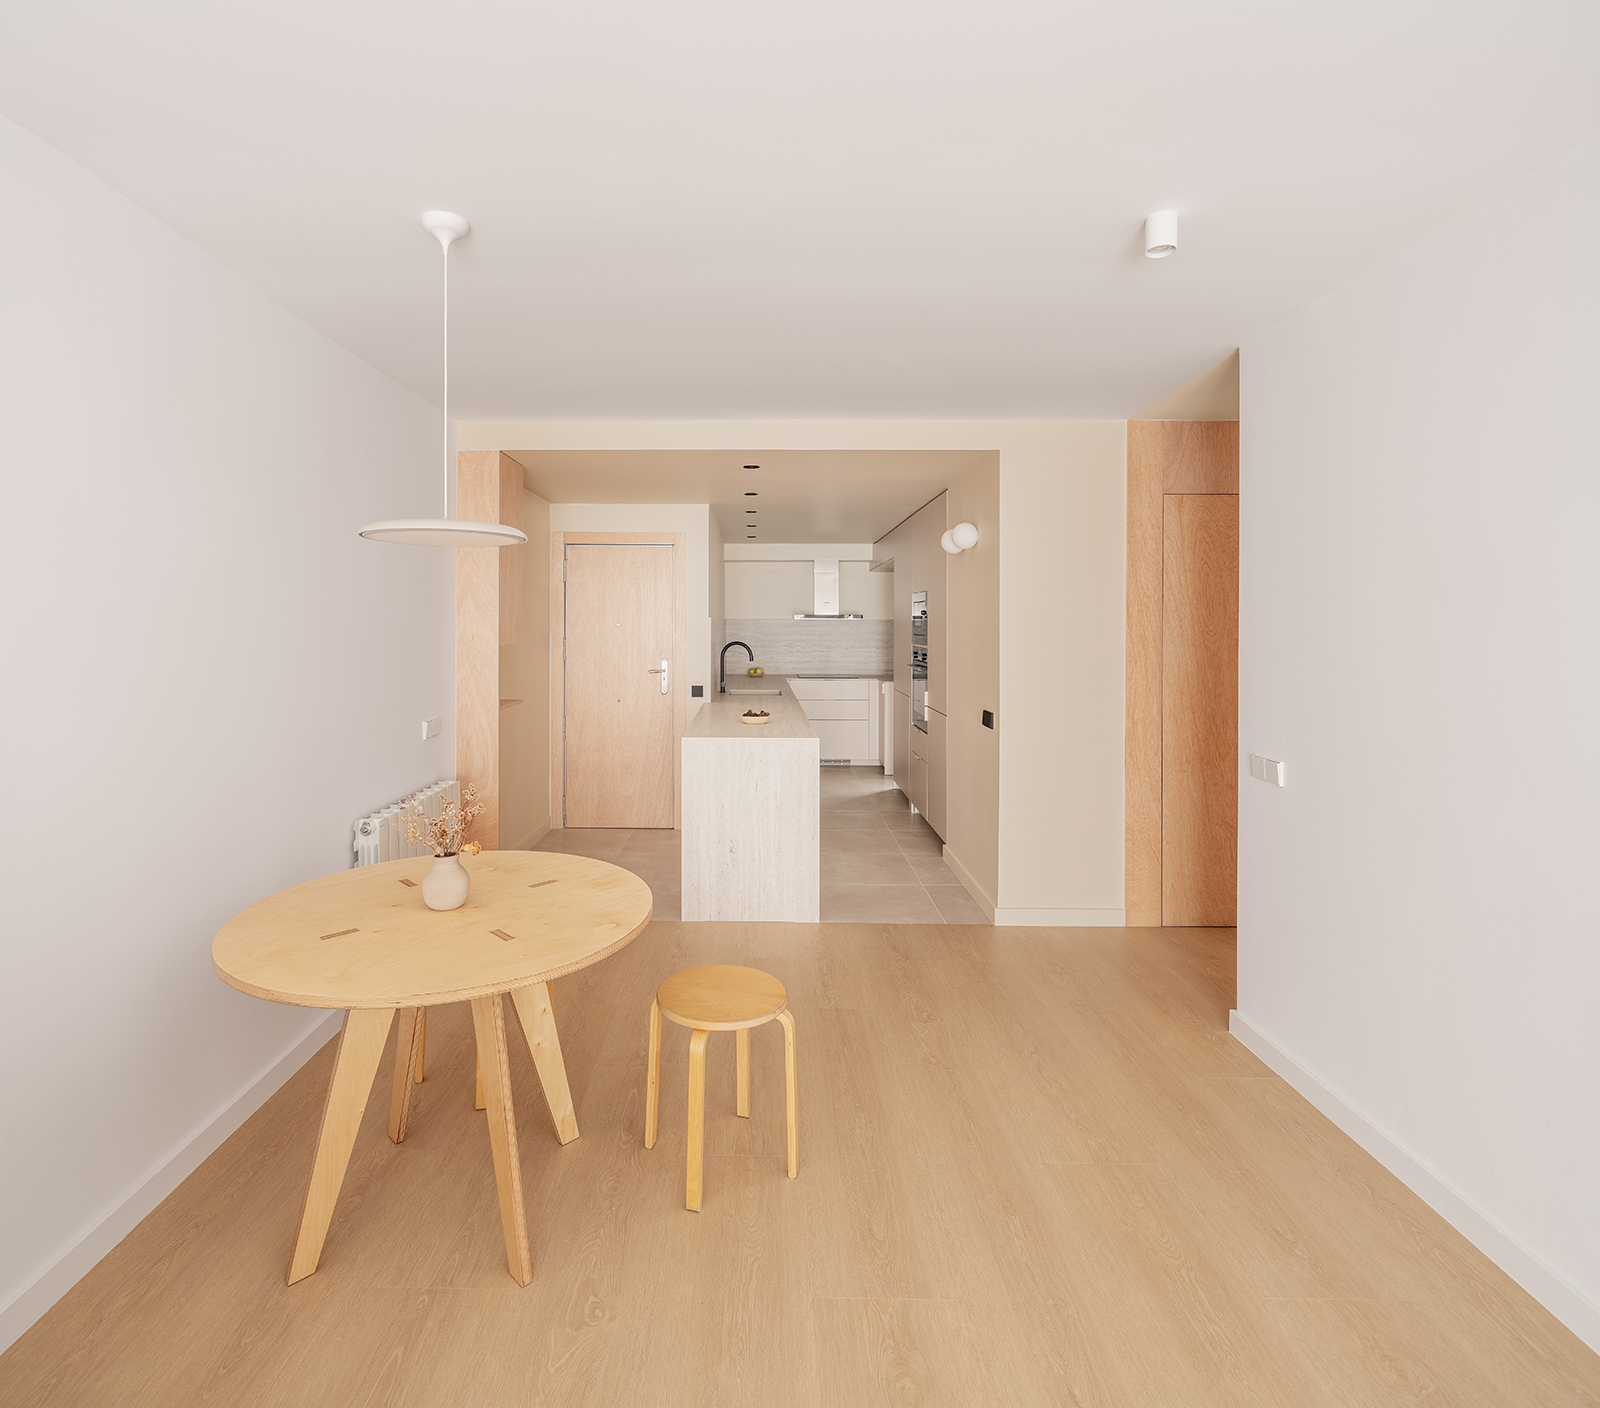 Archisearch Interior renovation of an apartment in a block of flats in el Masnou, Spain | by midori arquitectura